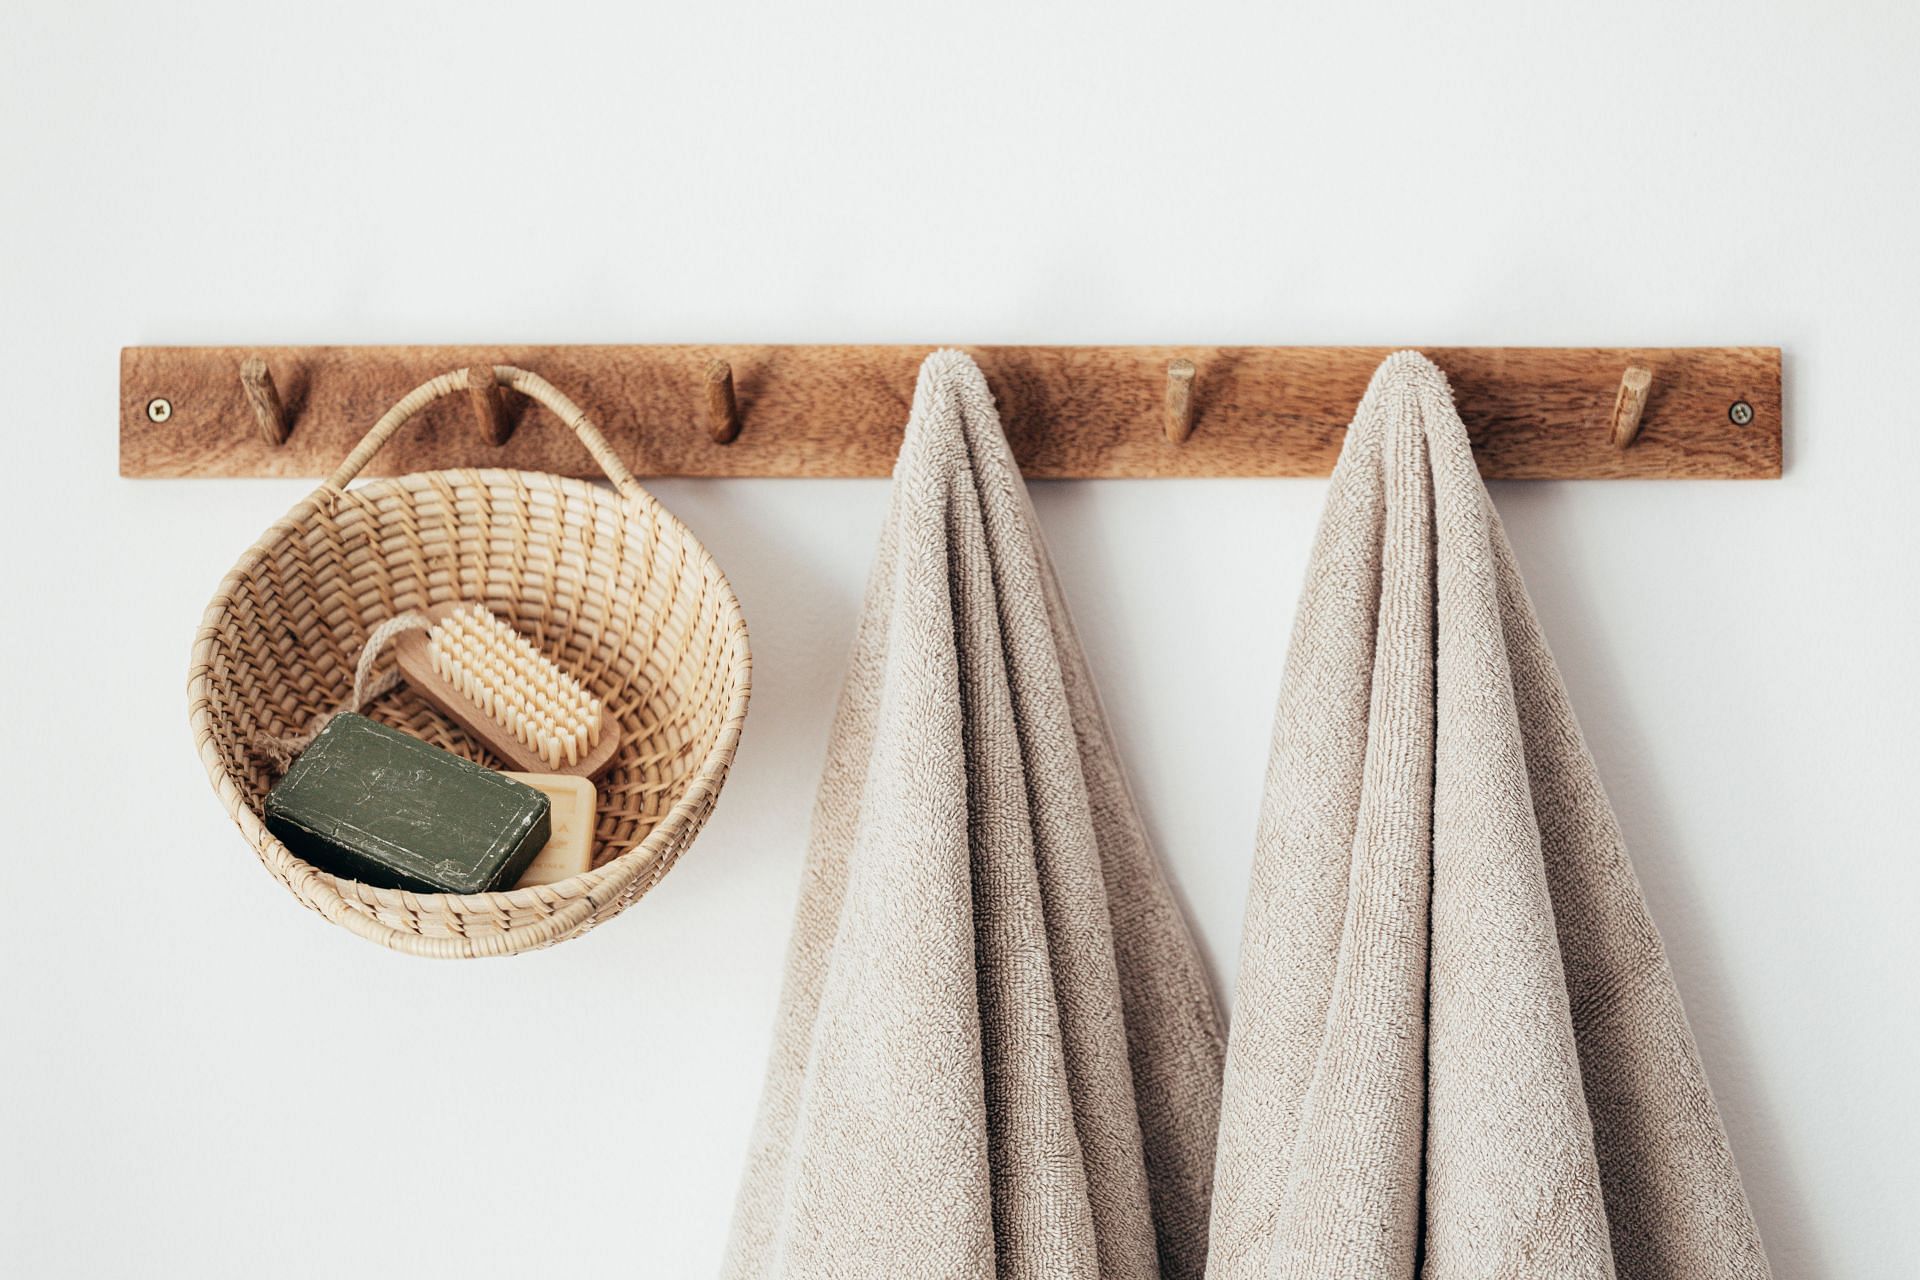 Bathing and washing your butt area regularly with anti-bacterial soap can act as a treatment for butt acne (Image via Pexels @Karolina Grabowska)